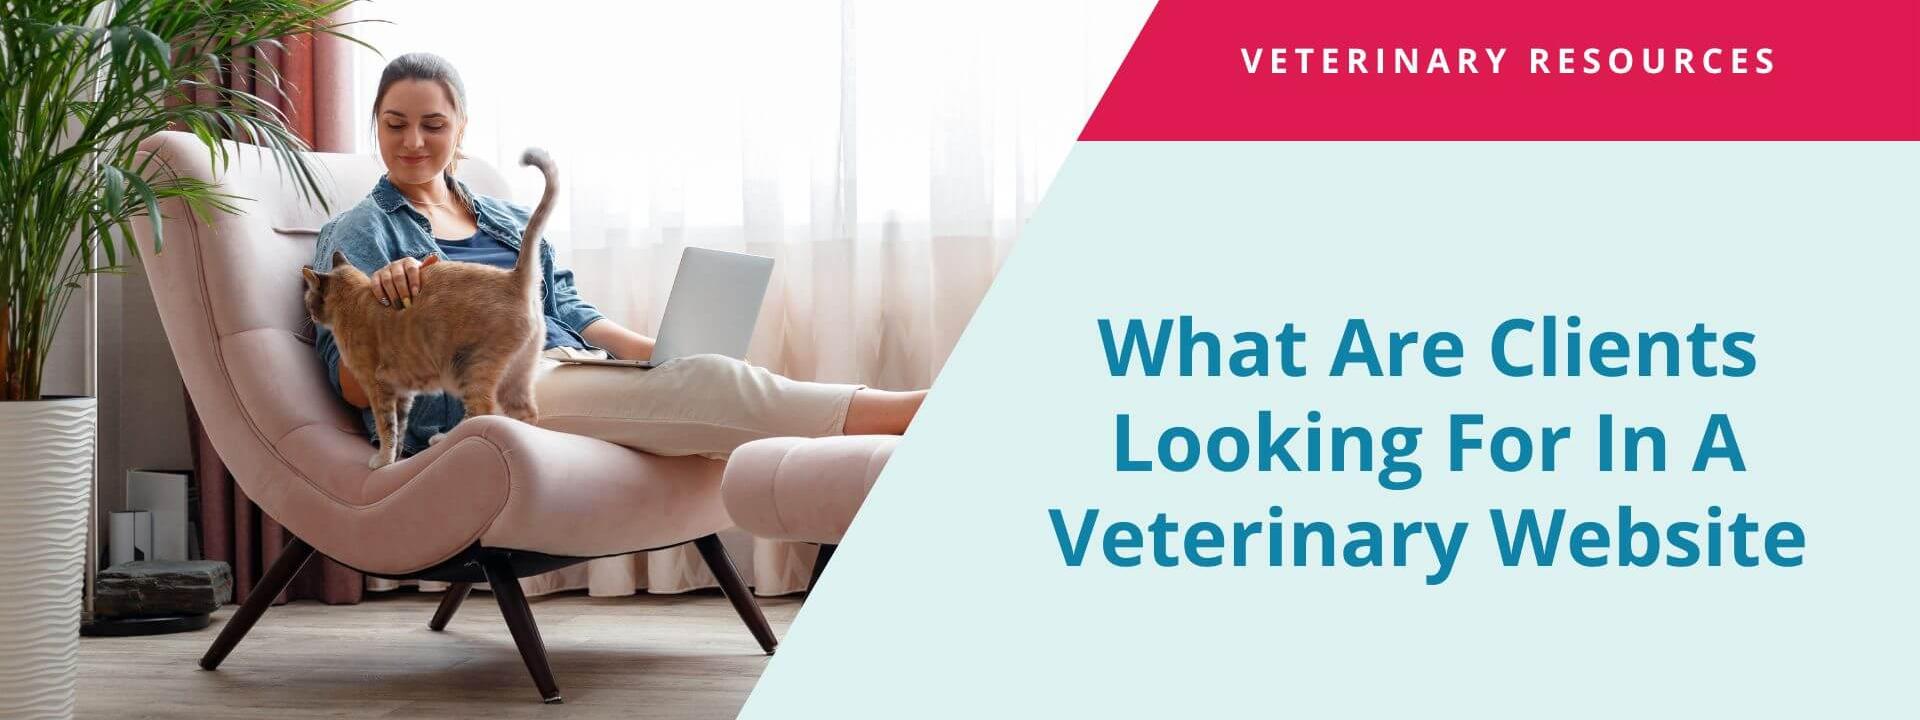 What Are New Clients Looking For In A Veterinary Website?